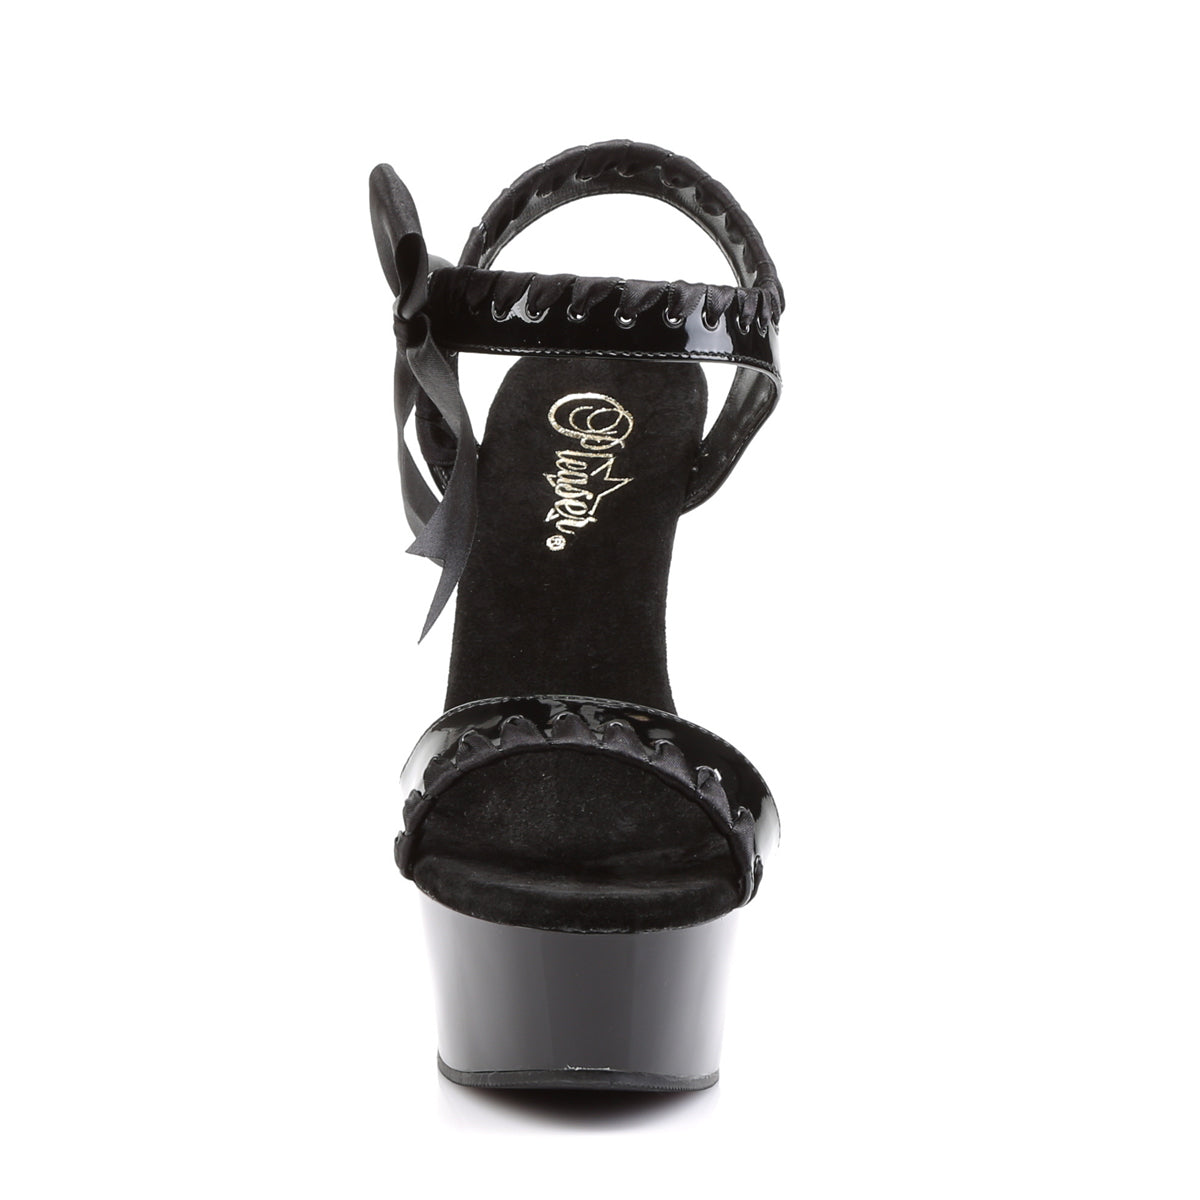 DELIGHT-615 / B / M 6 "PLEASER FAST DELIVERY 24-48h 